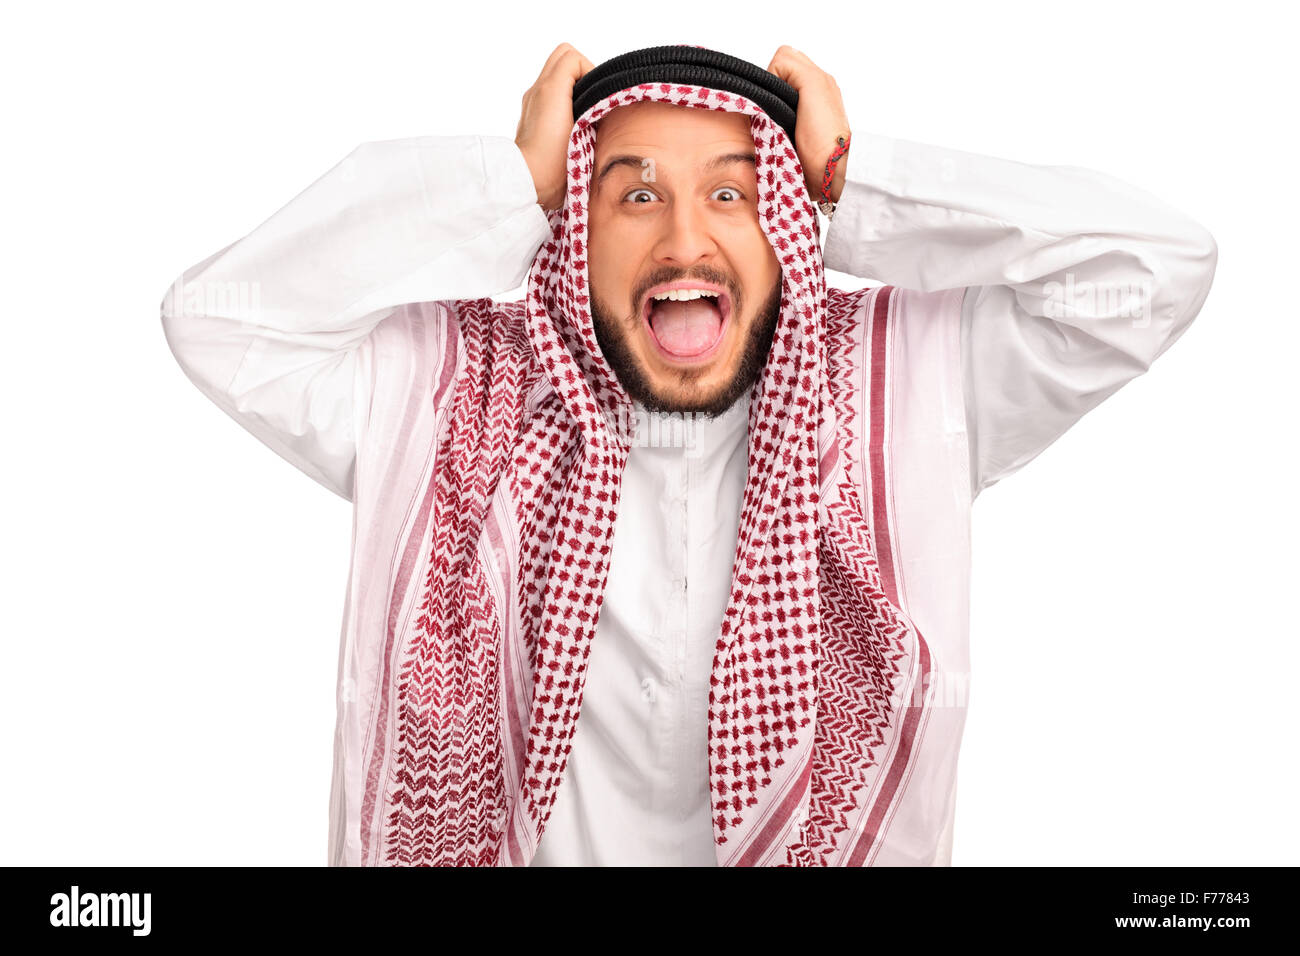 Studio shot of an outraged young Arab posing with his hands on his head isolated on white background Stock Photo